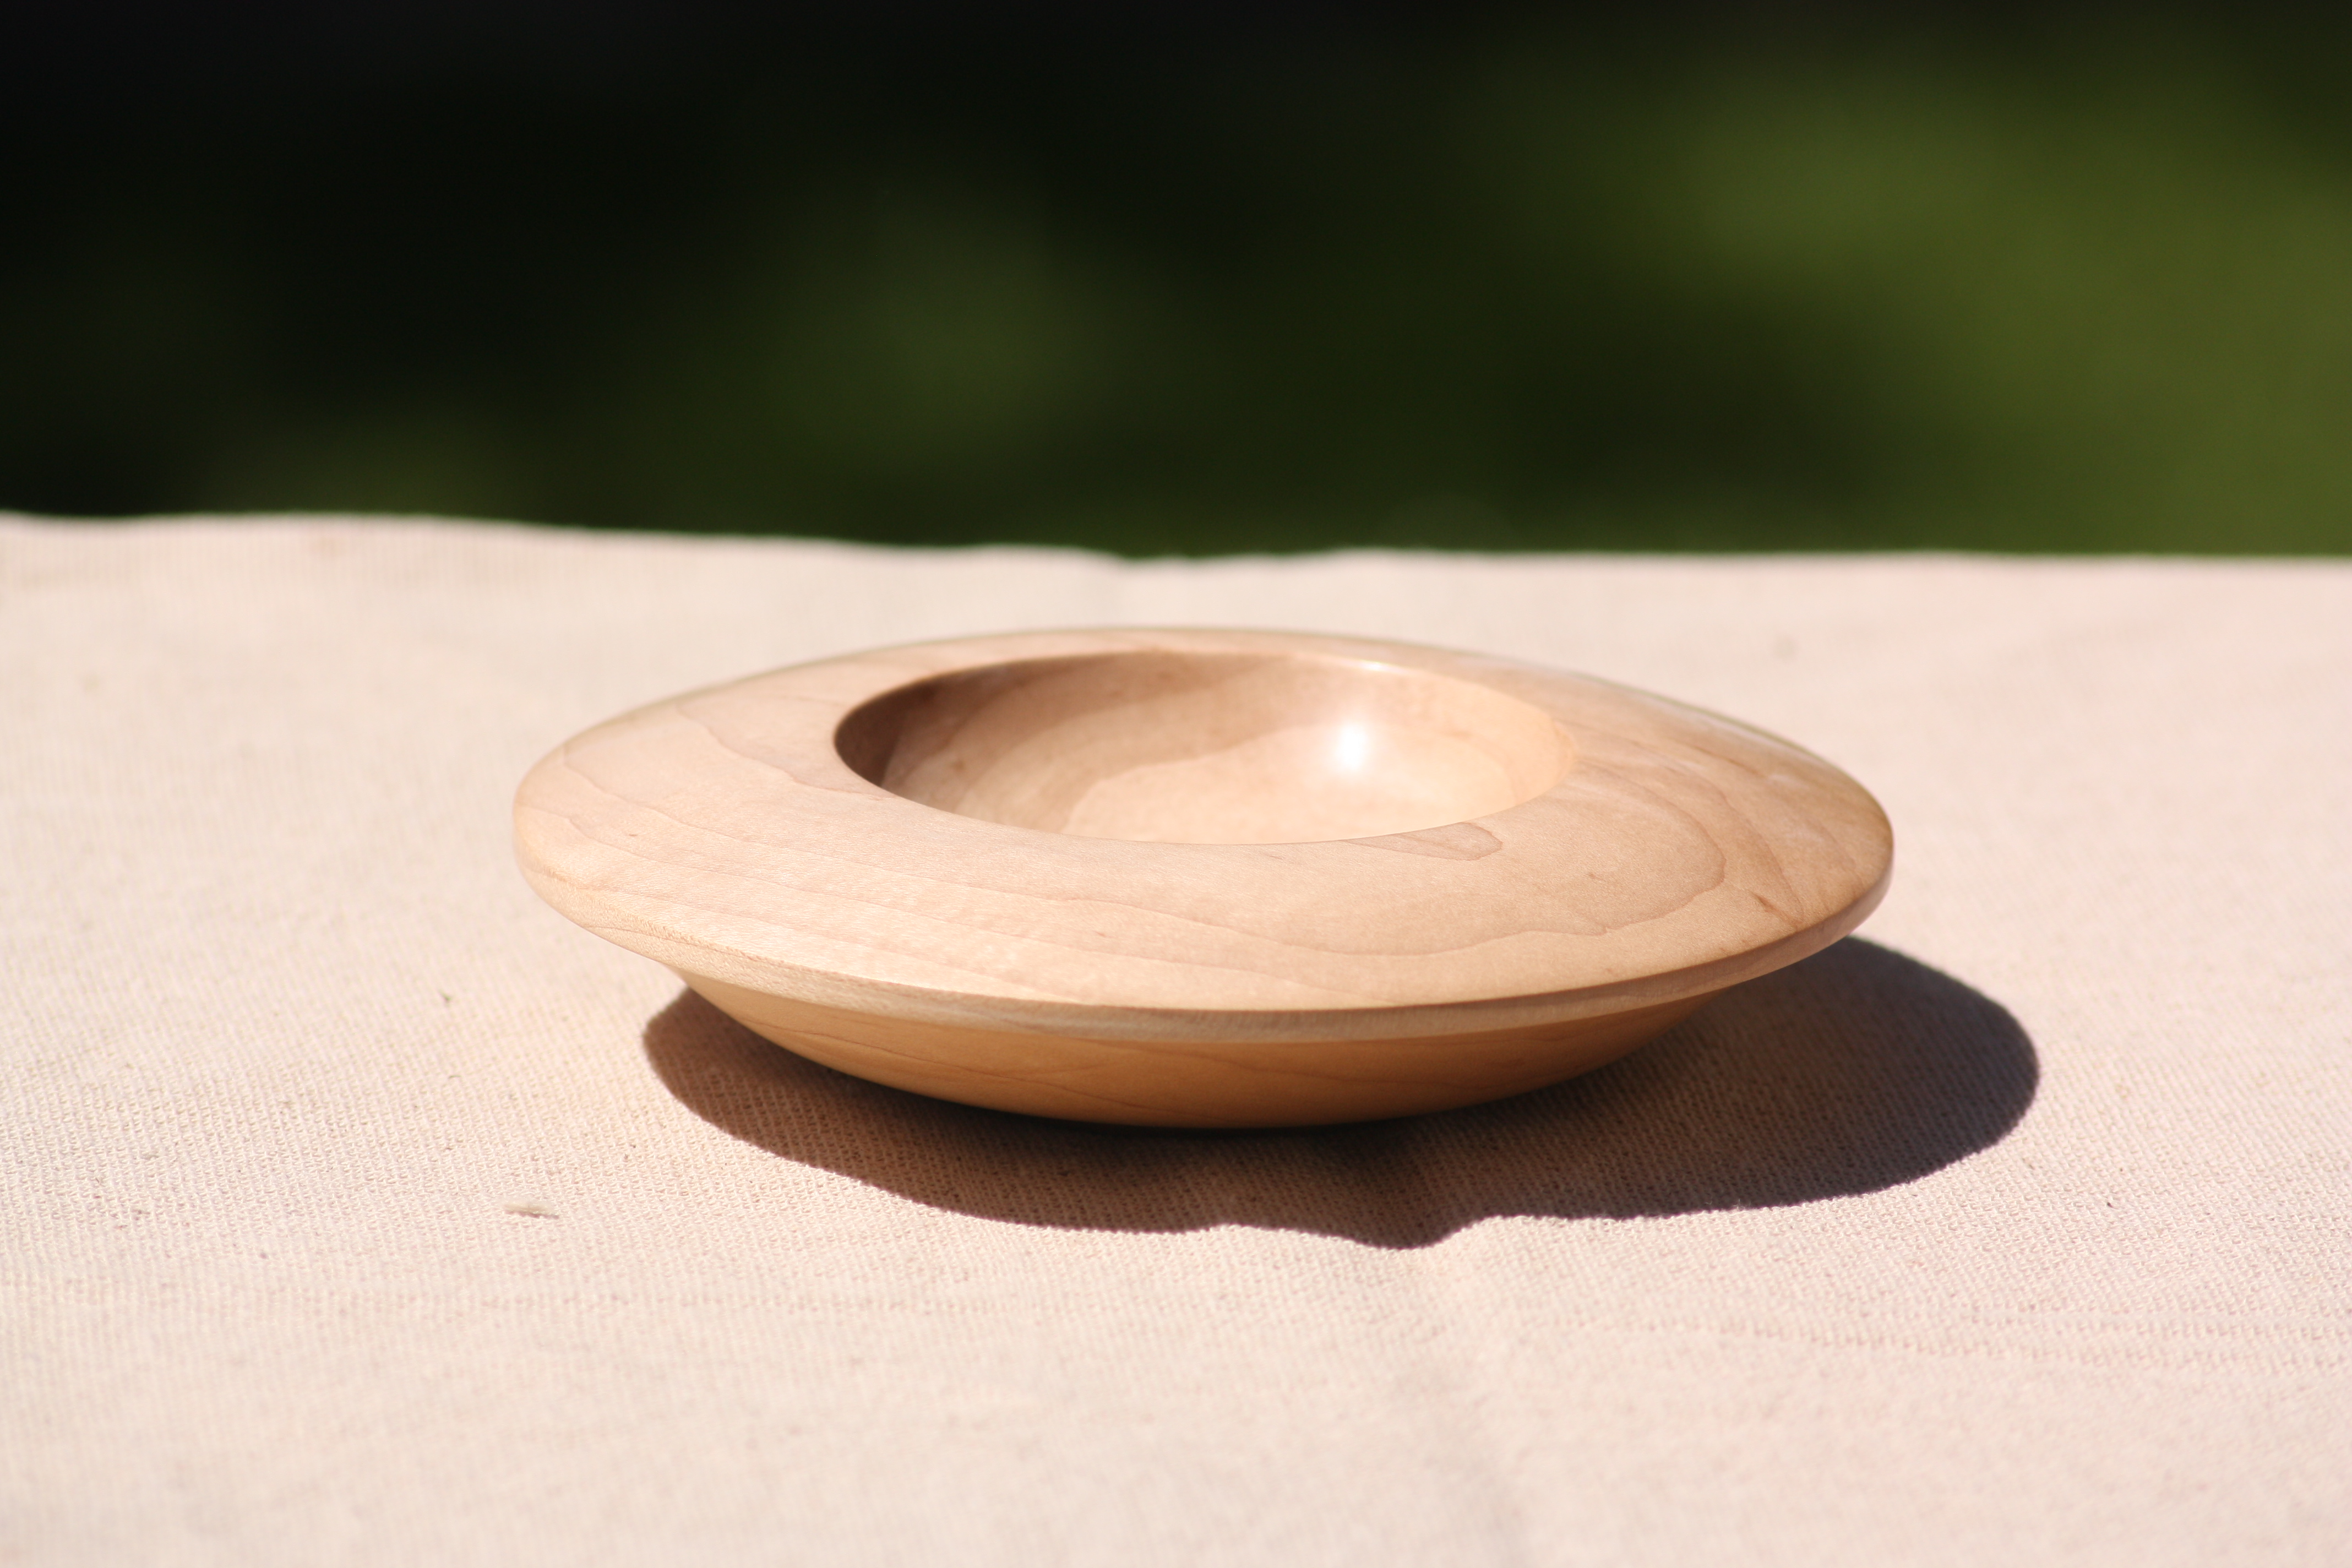 Side shot of Orbital style bowl showing undercut rim and Ogee base.